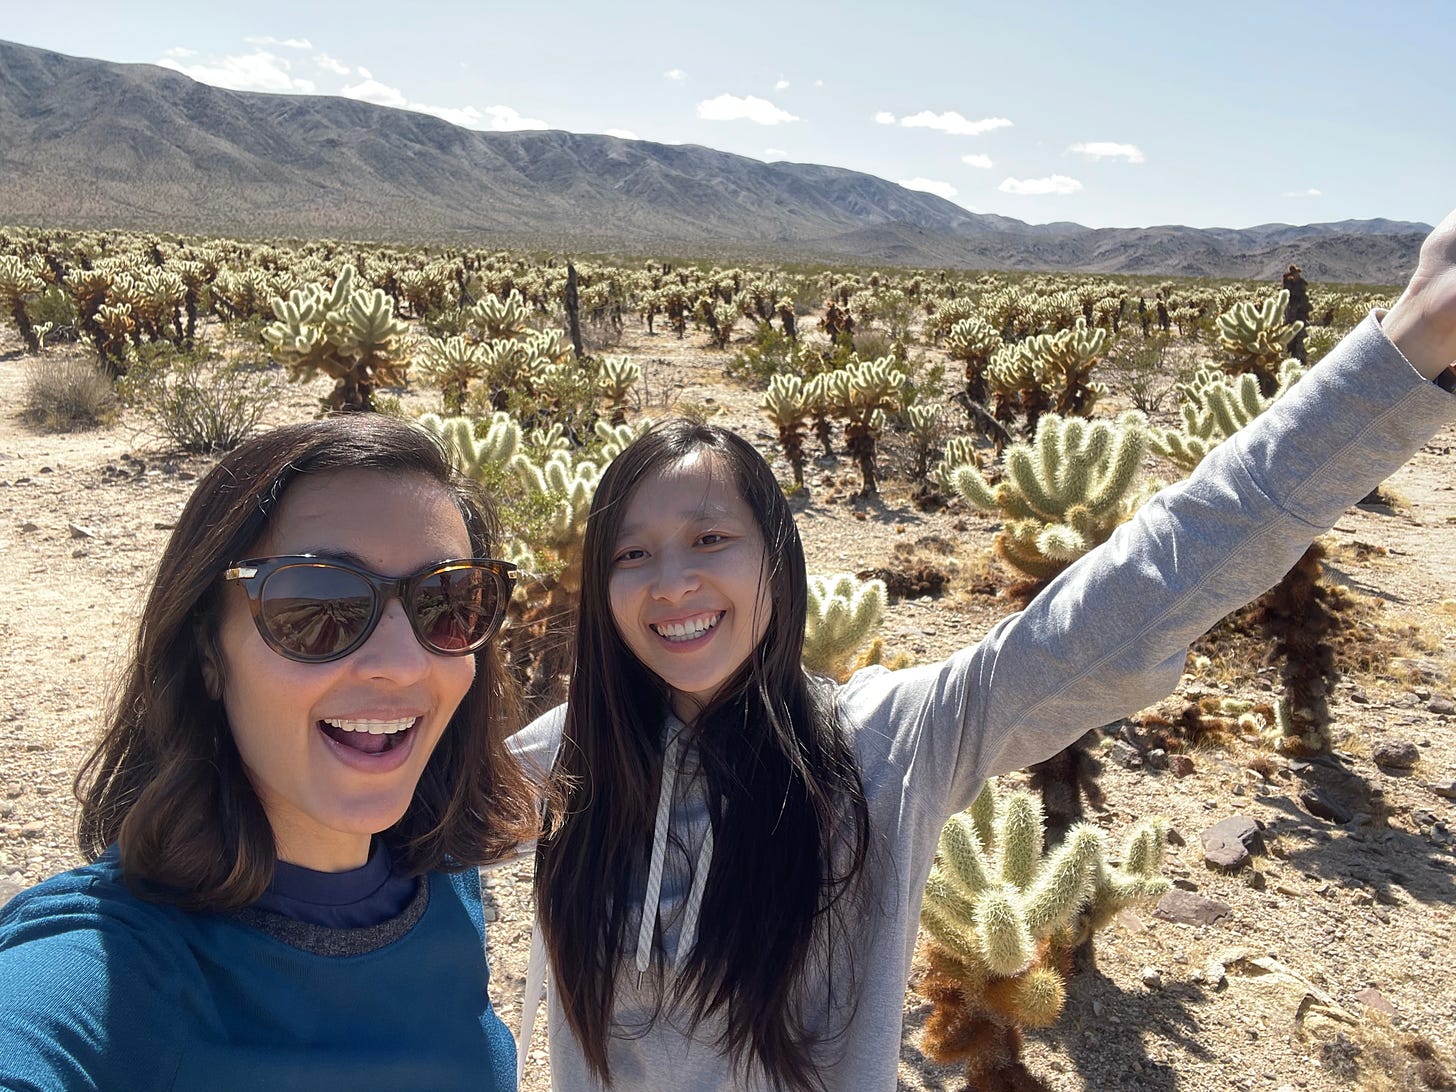 Two woman stand in front of a cactus garden in the desert. The woman on the right has long black hair and wears a gray jacket. The woman on the left has short dark brown hair, sunglasses, and a blue shirt.